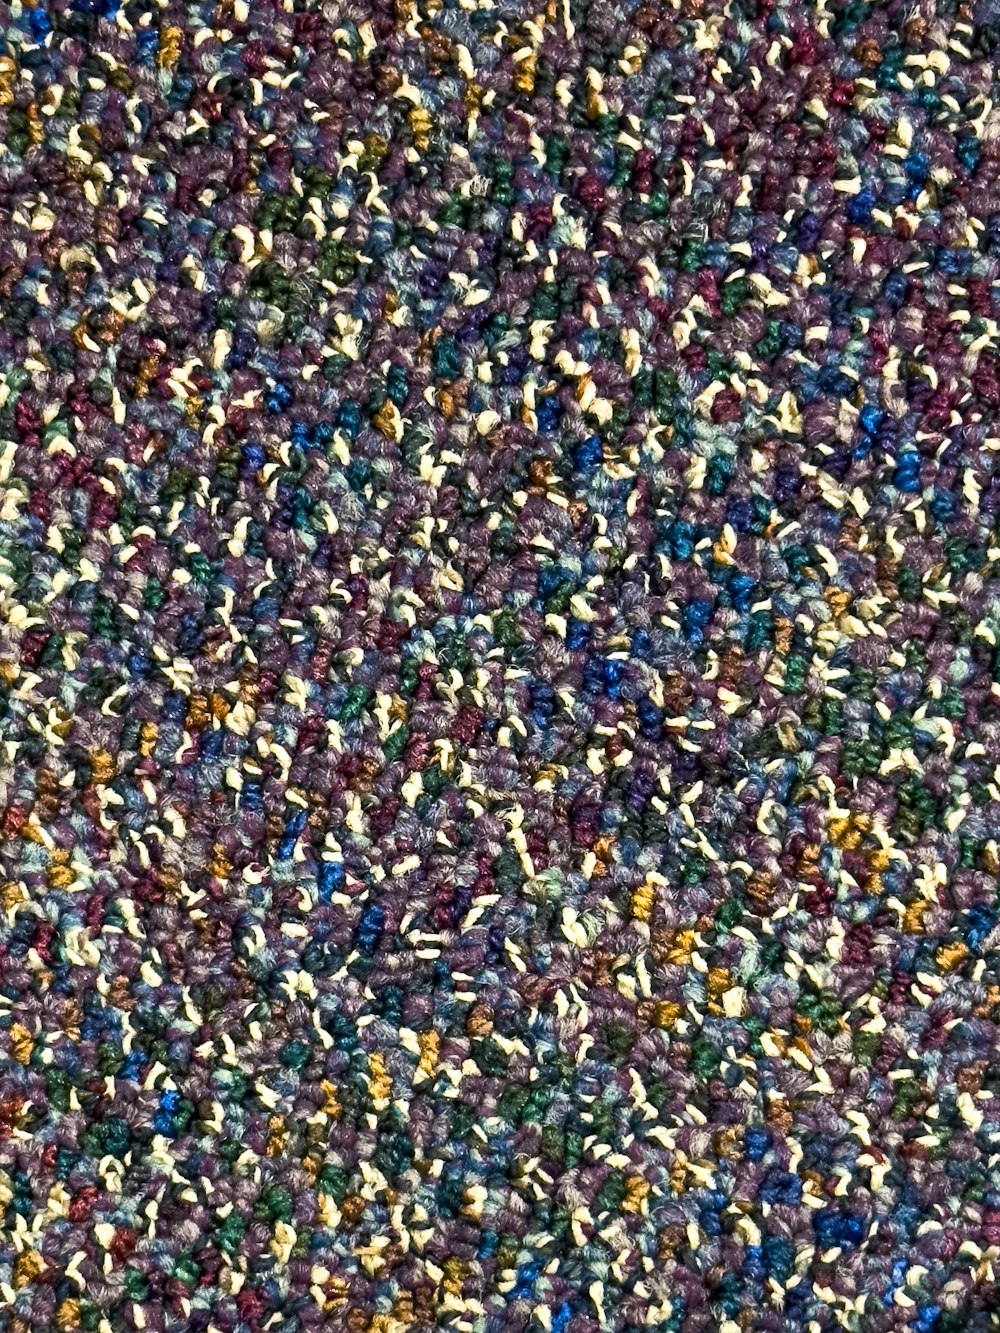 a close up view of a colorful carpet